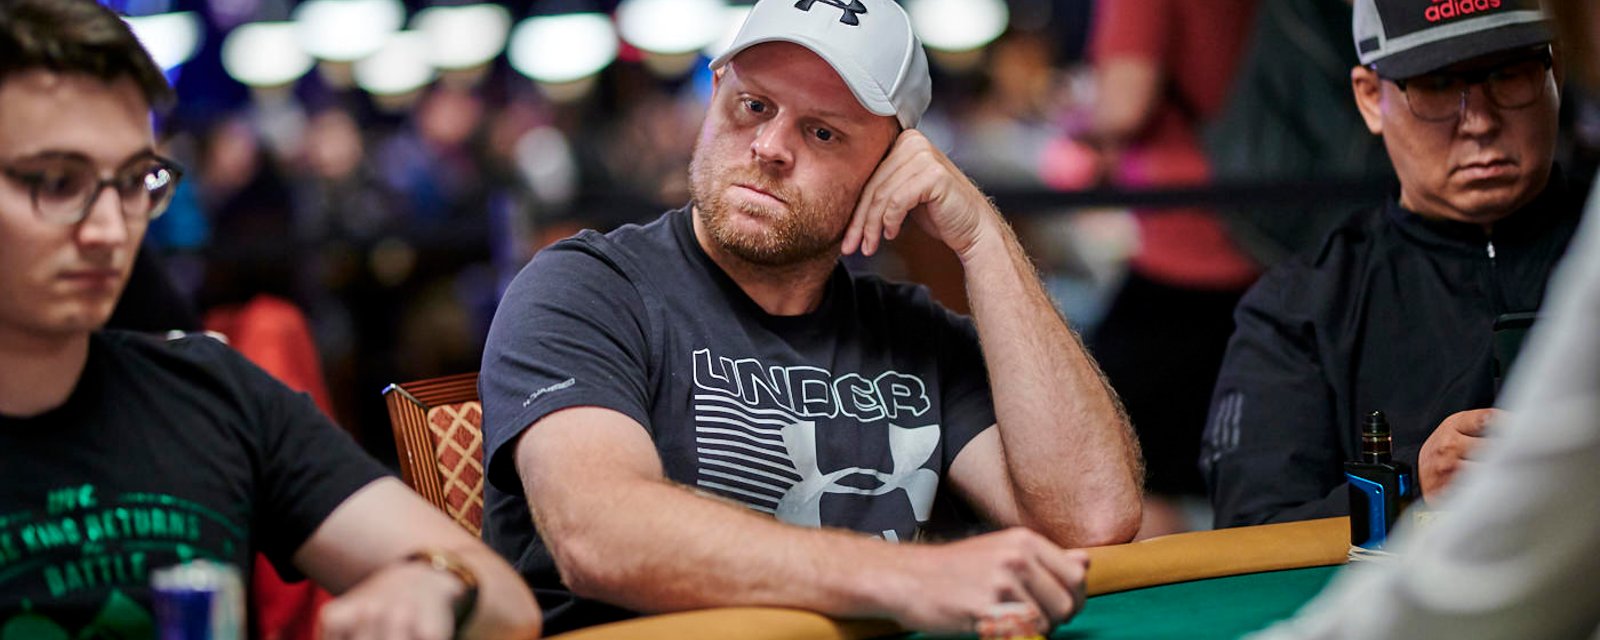 More revealed about Phil Kessel’s casino troubles by former Pens GM Rutheford